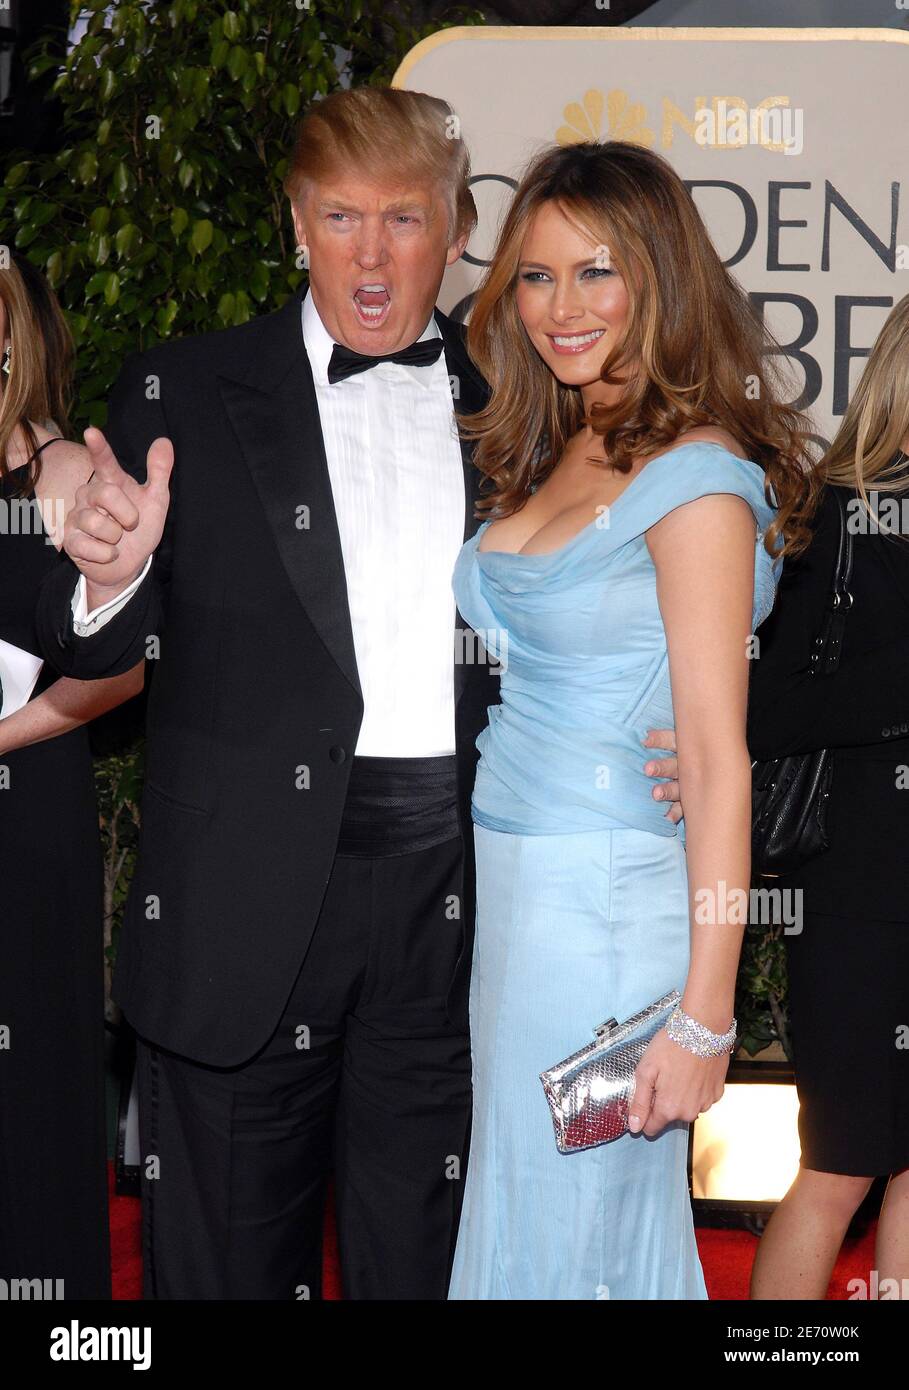 Donald Trump and Melania Knauss pose for pictures at the Costume Institute  Gala Celebrating "Dangerous Liaisons: Fashion and Furniture in the 18th  Century" at the Metropolitan Museum of Art in New York